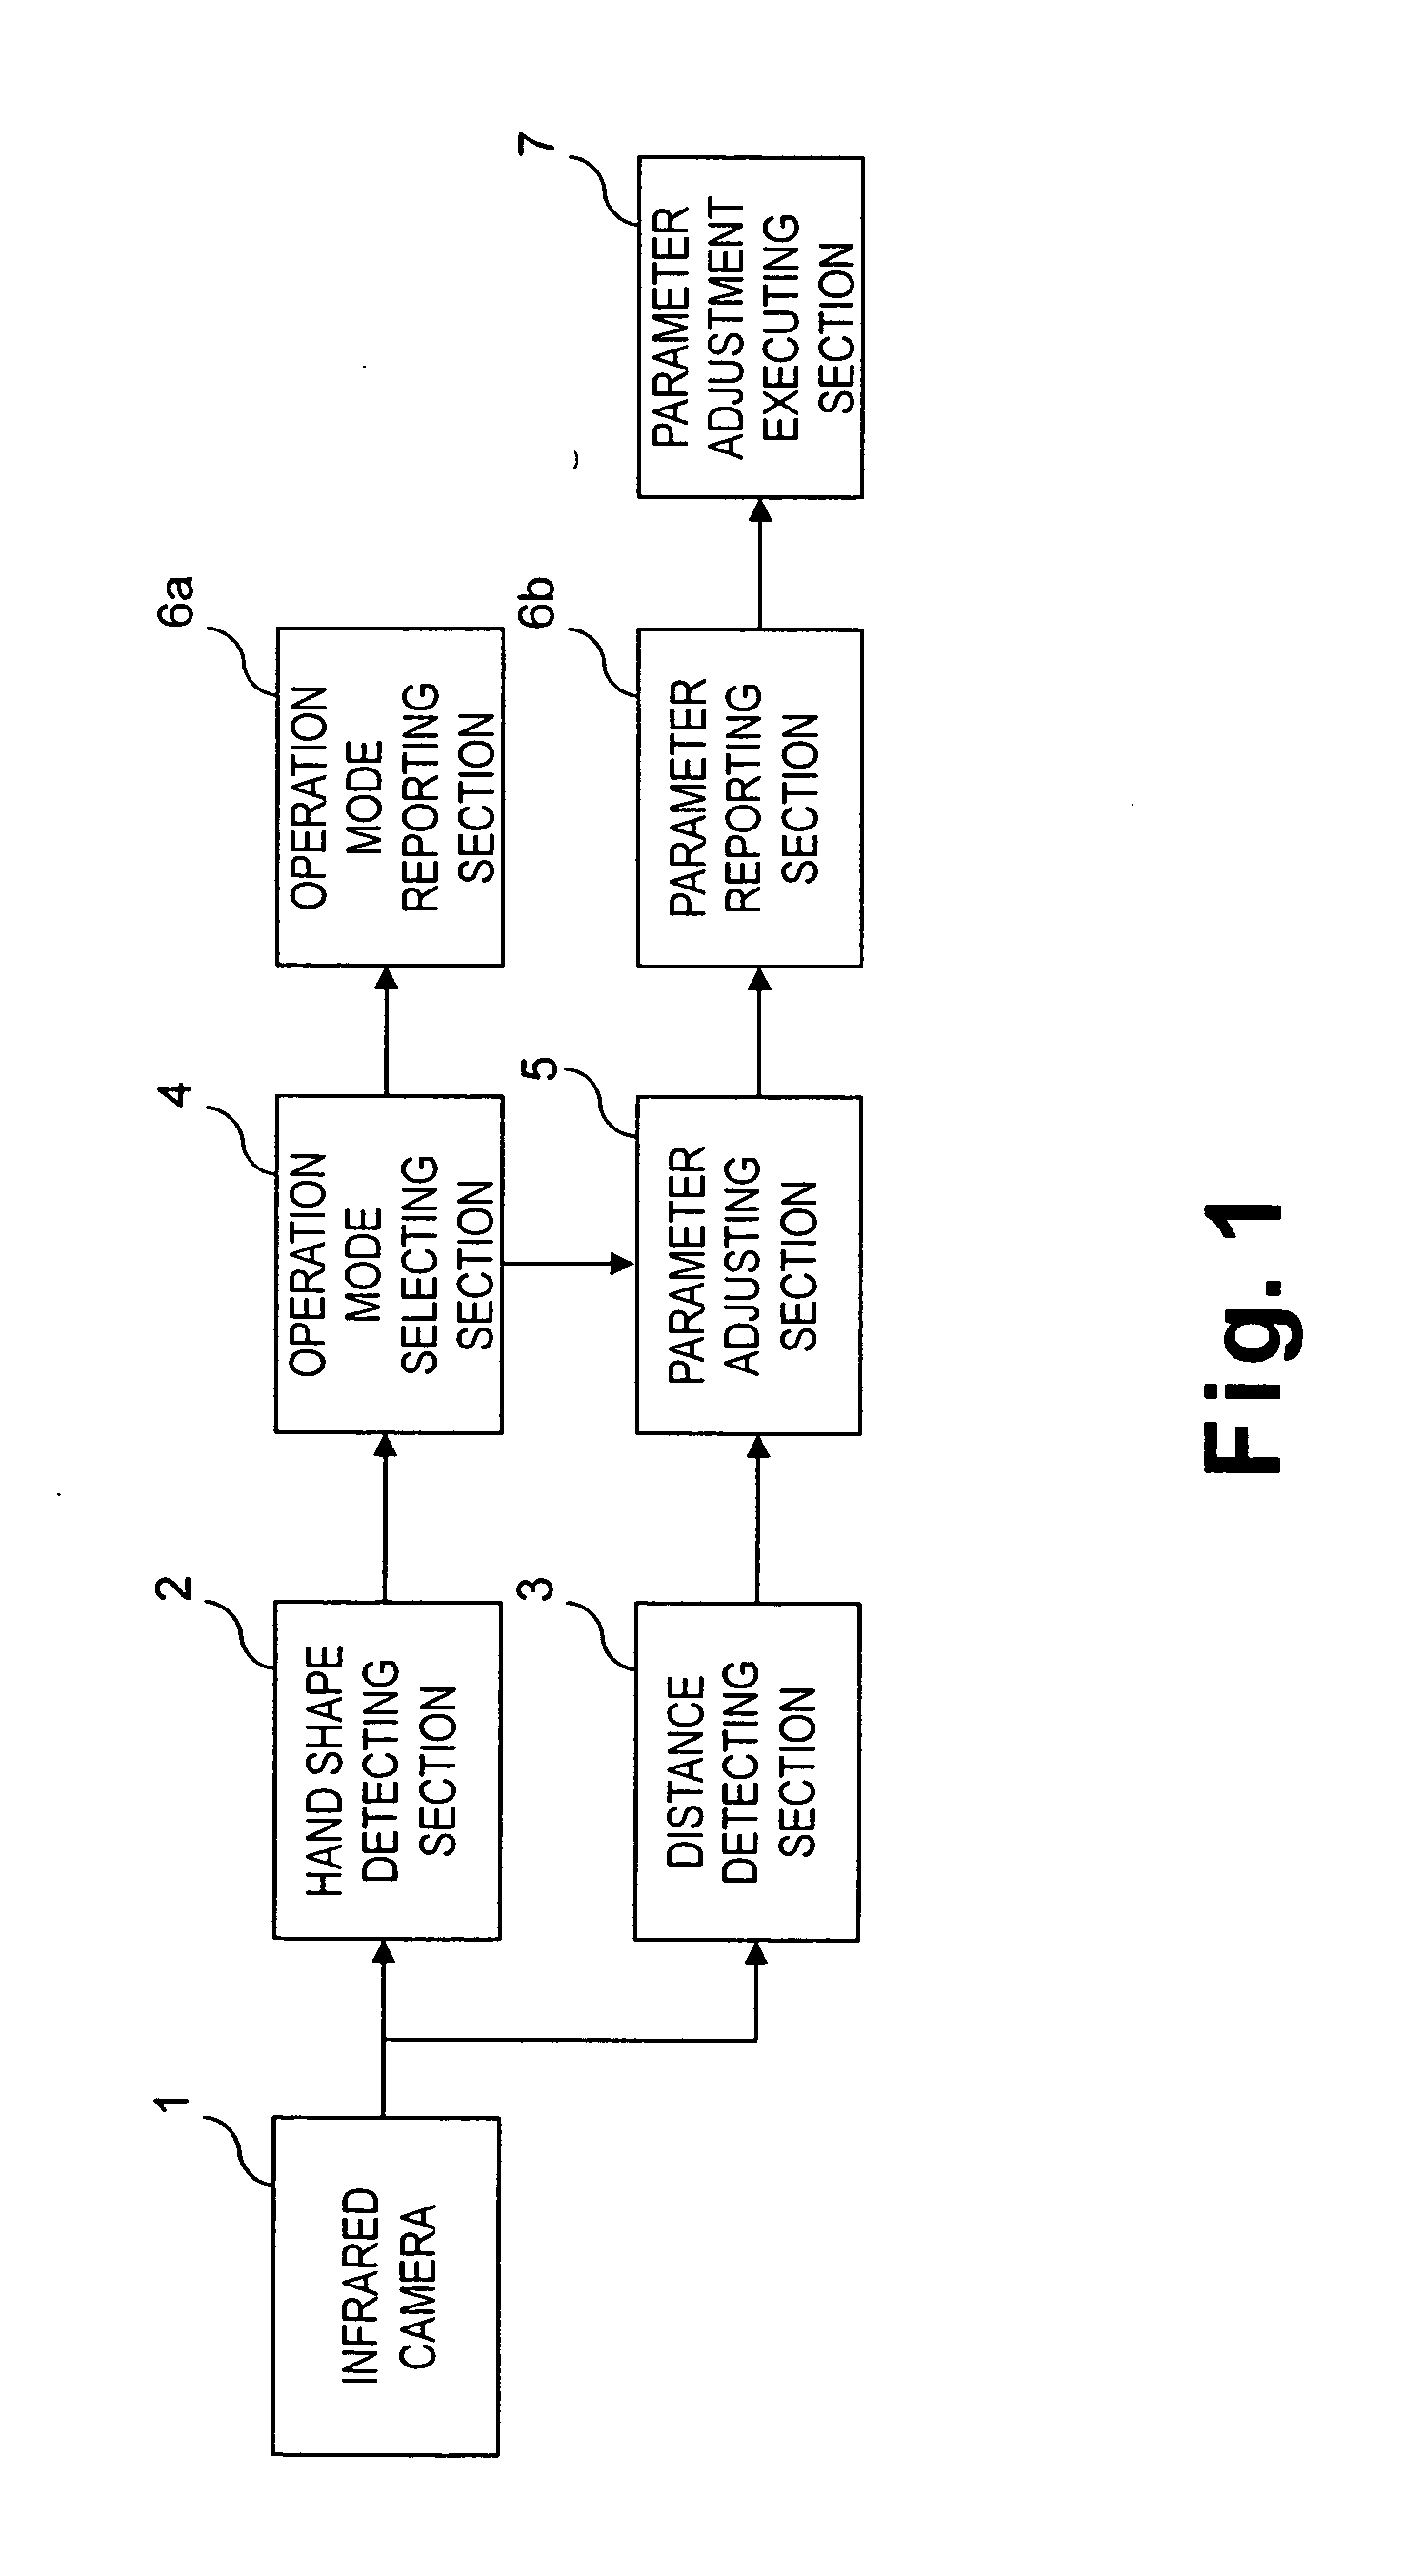 Non-contact information input device